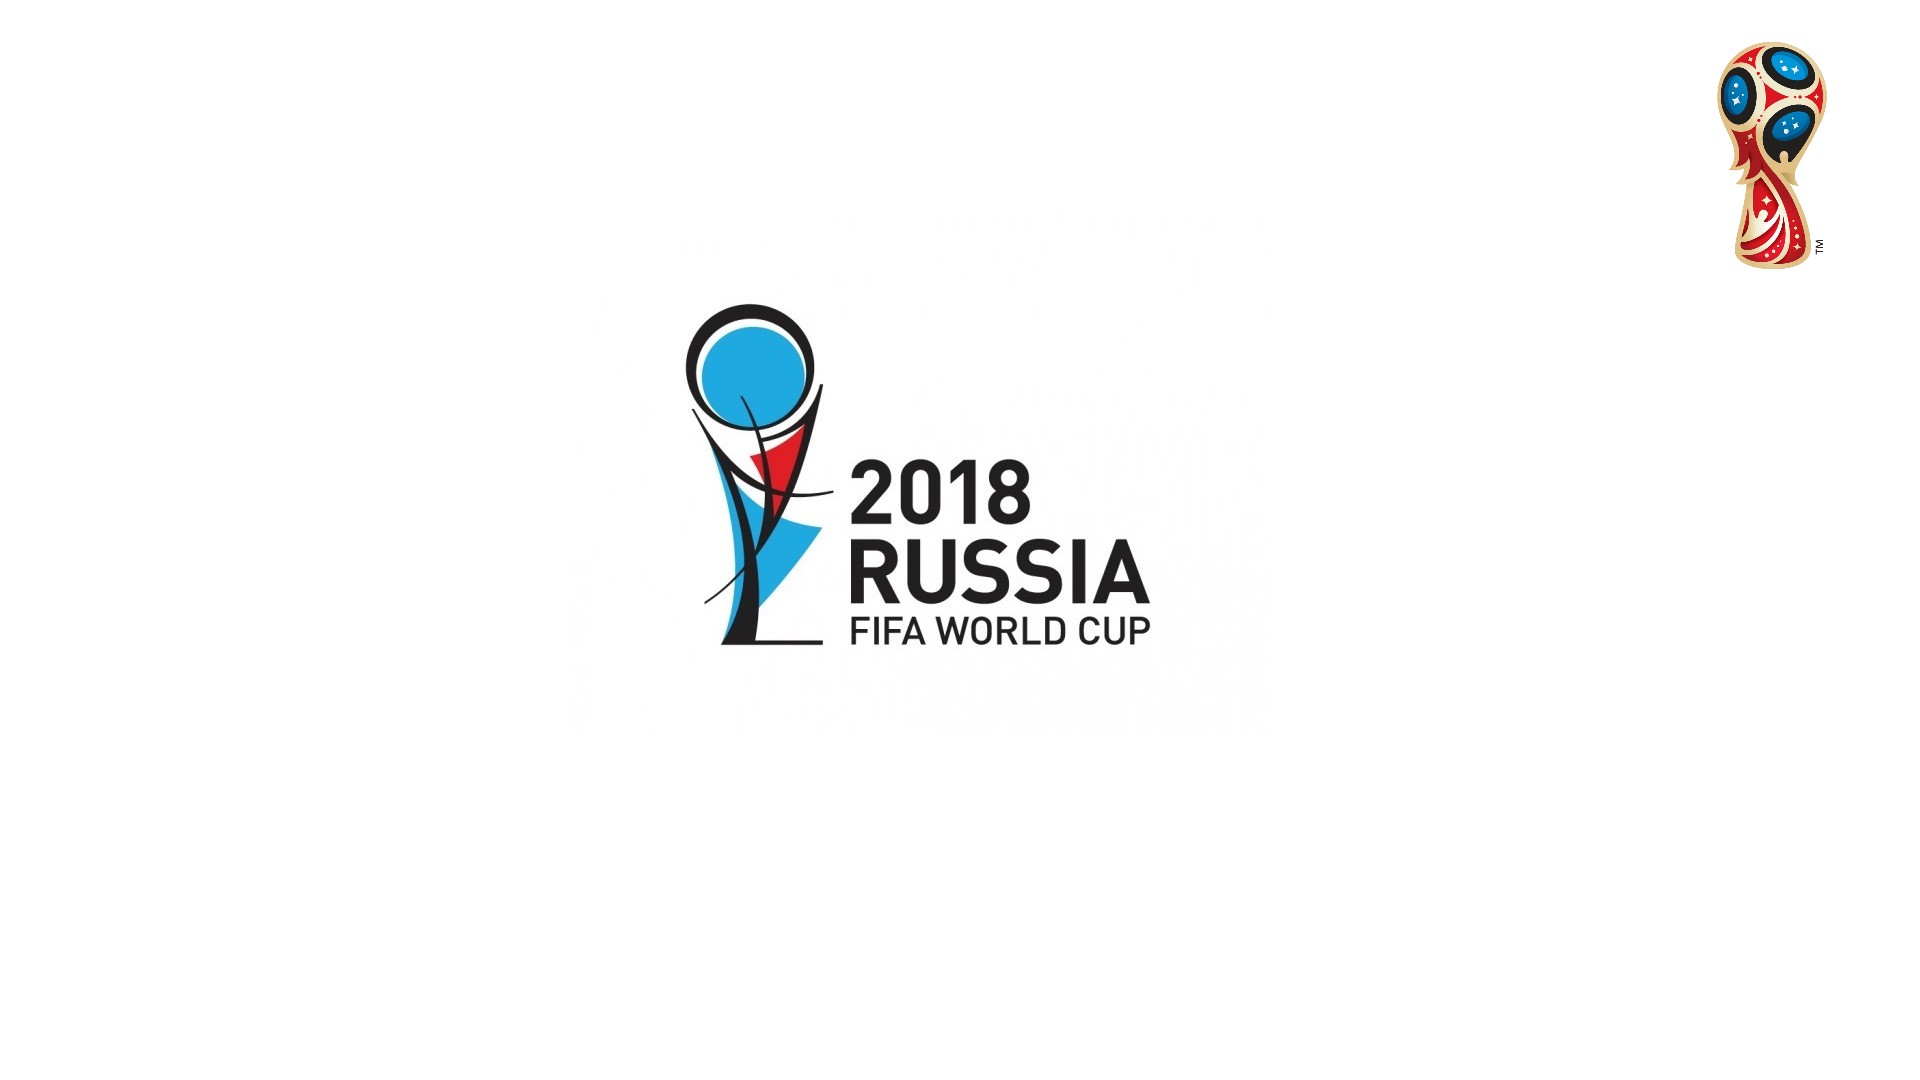 FIFA World Cup Desktop Wallpapers With Resolution 1920X1080 pixel. You can make this wallpaper for your Mac or Windows Desktop Background, iPhone, Android or Tablet and another Smartphone device for free